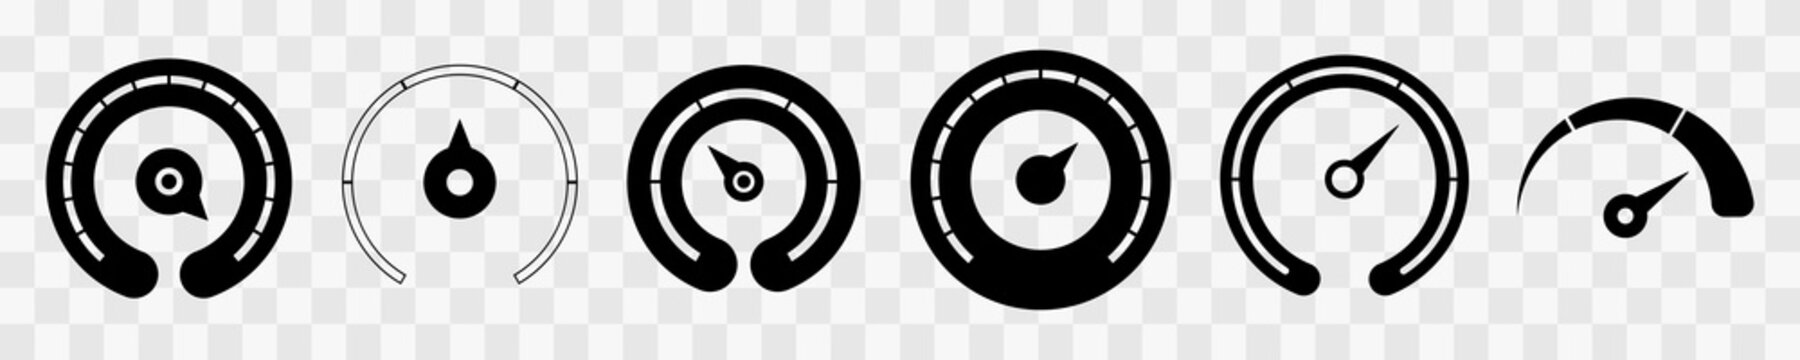 Different measure scale icons. Speedometer, stopwatch, thermostat, fuel level indicator. Collection of design elements.